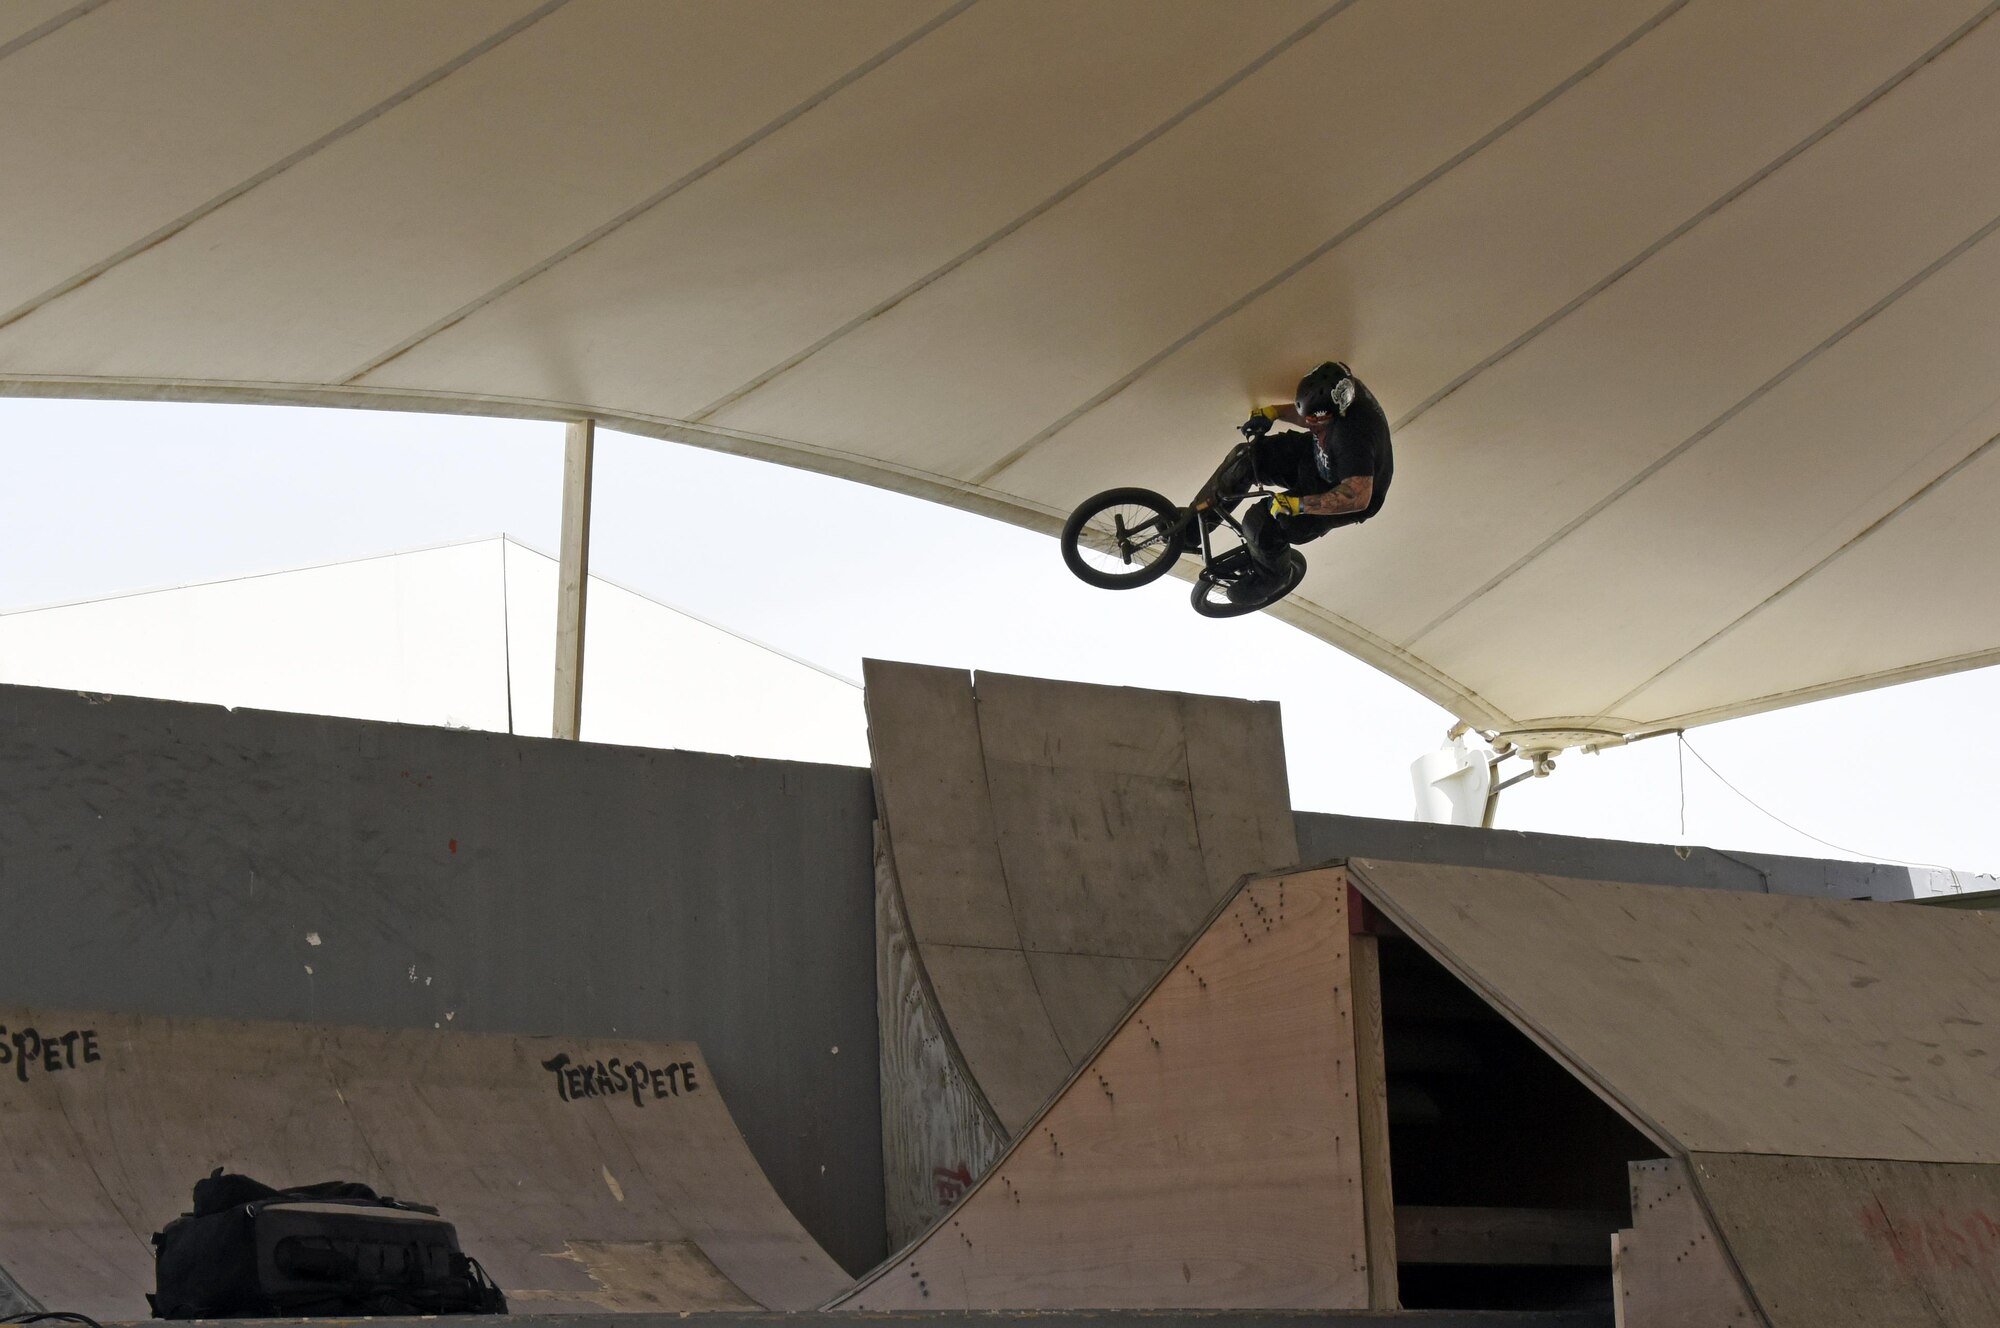 A Bikes Over Baghdad BMX rider jumps over a ramp at Al Udeid Air Base, Qatar, April 20, 2017. Bikes Over Baghdad is a professional team of BMX Riders who travel throughout the U.S. Central Command area of responsibility putting on shows for service members. (U.S. Air Force photo by Senior Airman Cynthia A Innocenti)